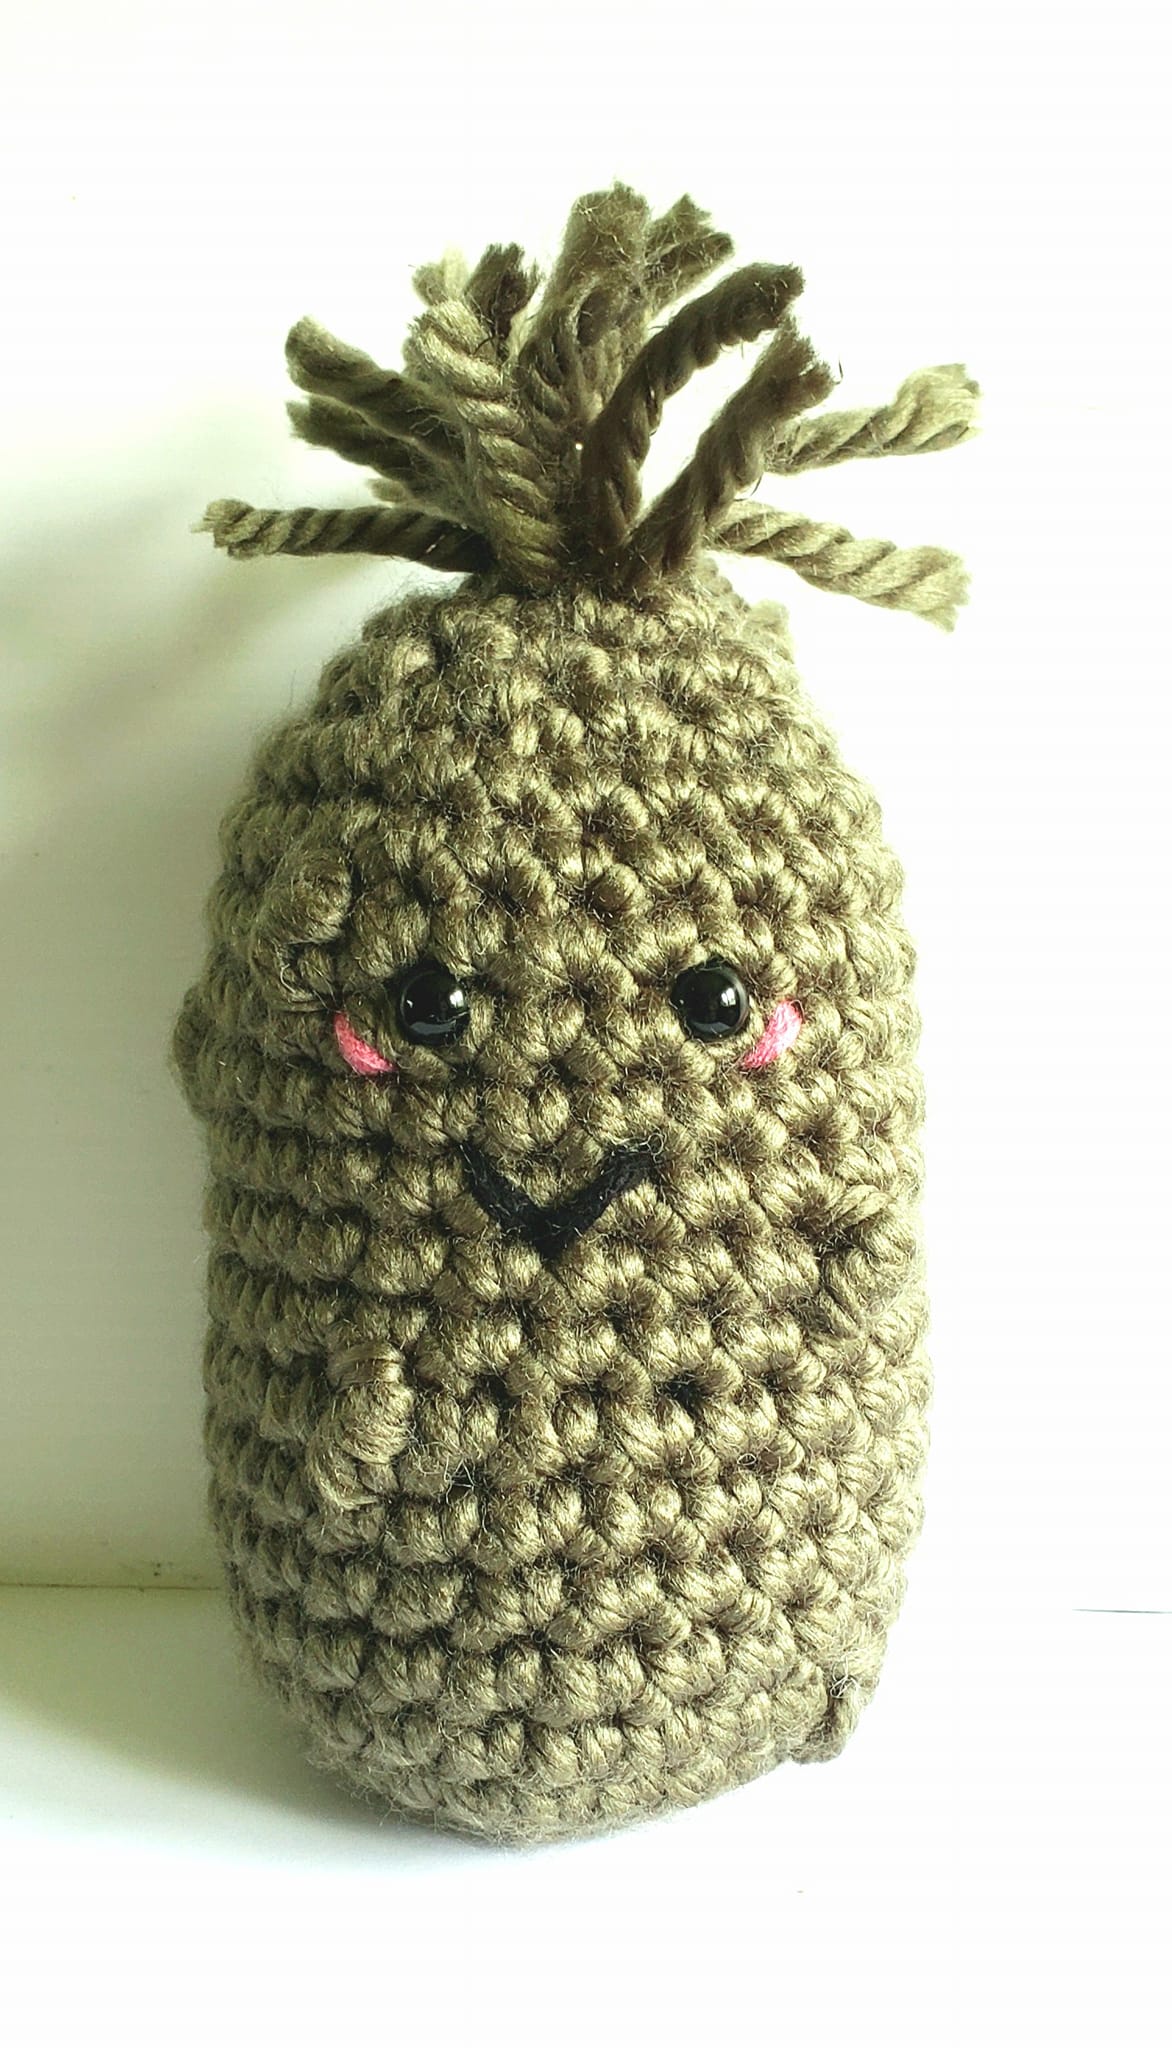 Emotional Support Pickle Crochet Pickle Stuffy 